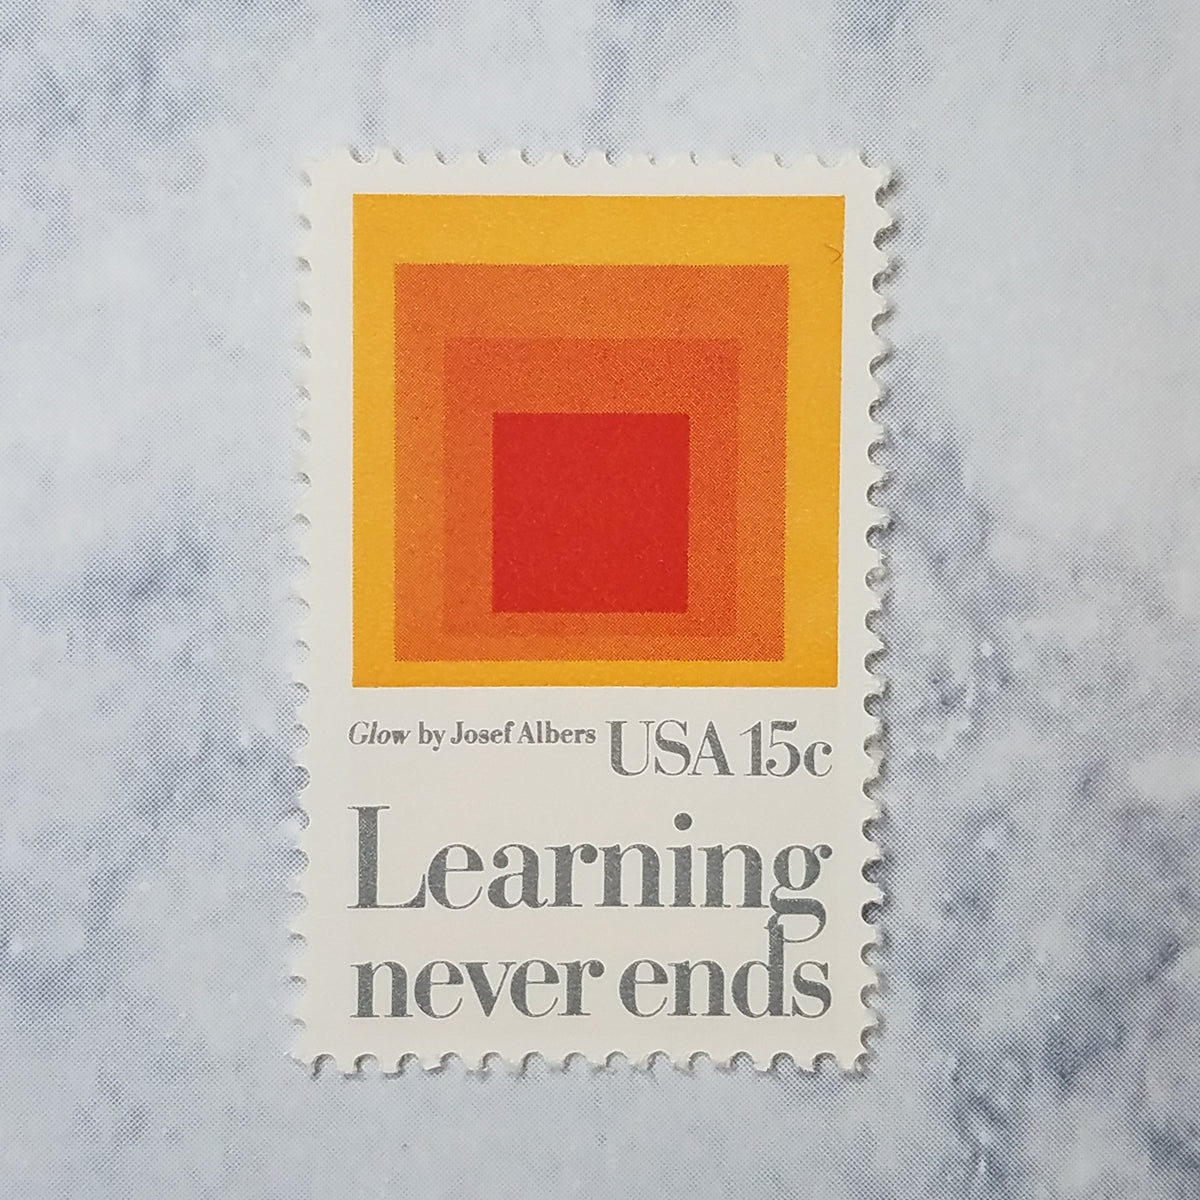 inviting: vintage postage stamps of – inviting : letterpress boutique